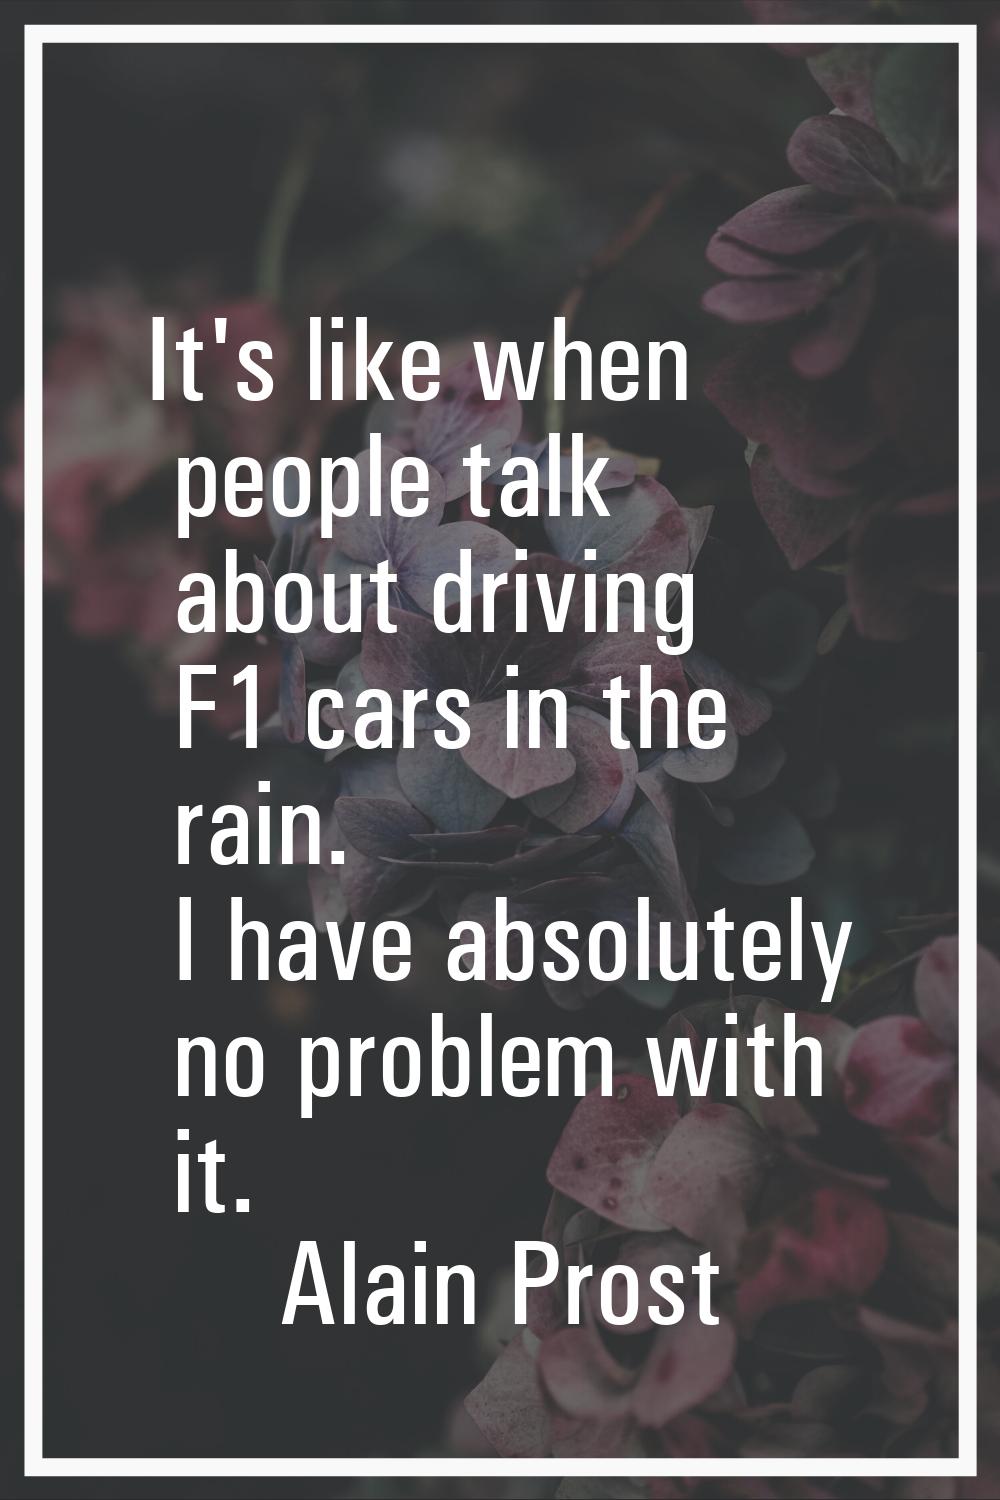 It's like when people talk about driving F1 cars in the rain. I have absolutely no problem with it.